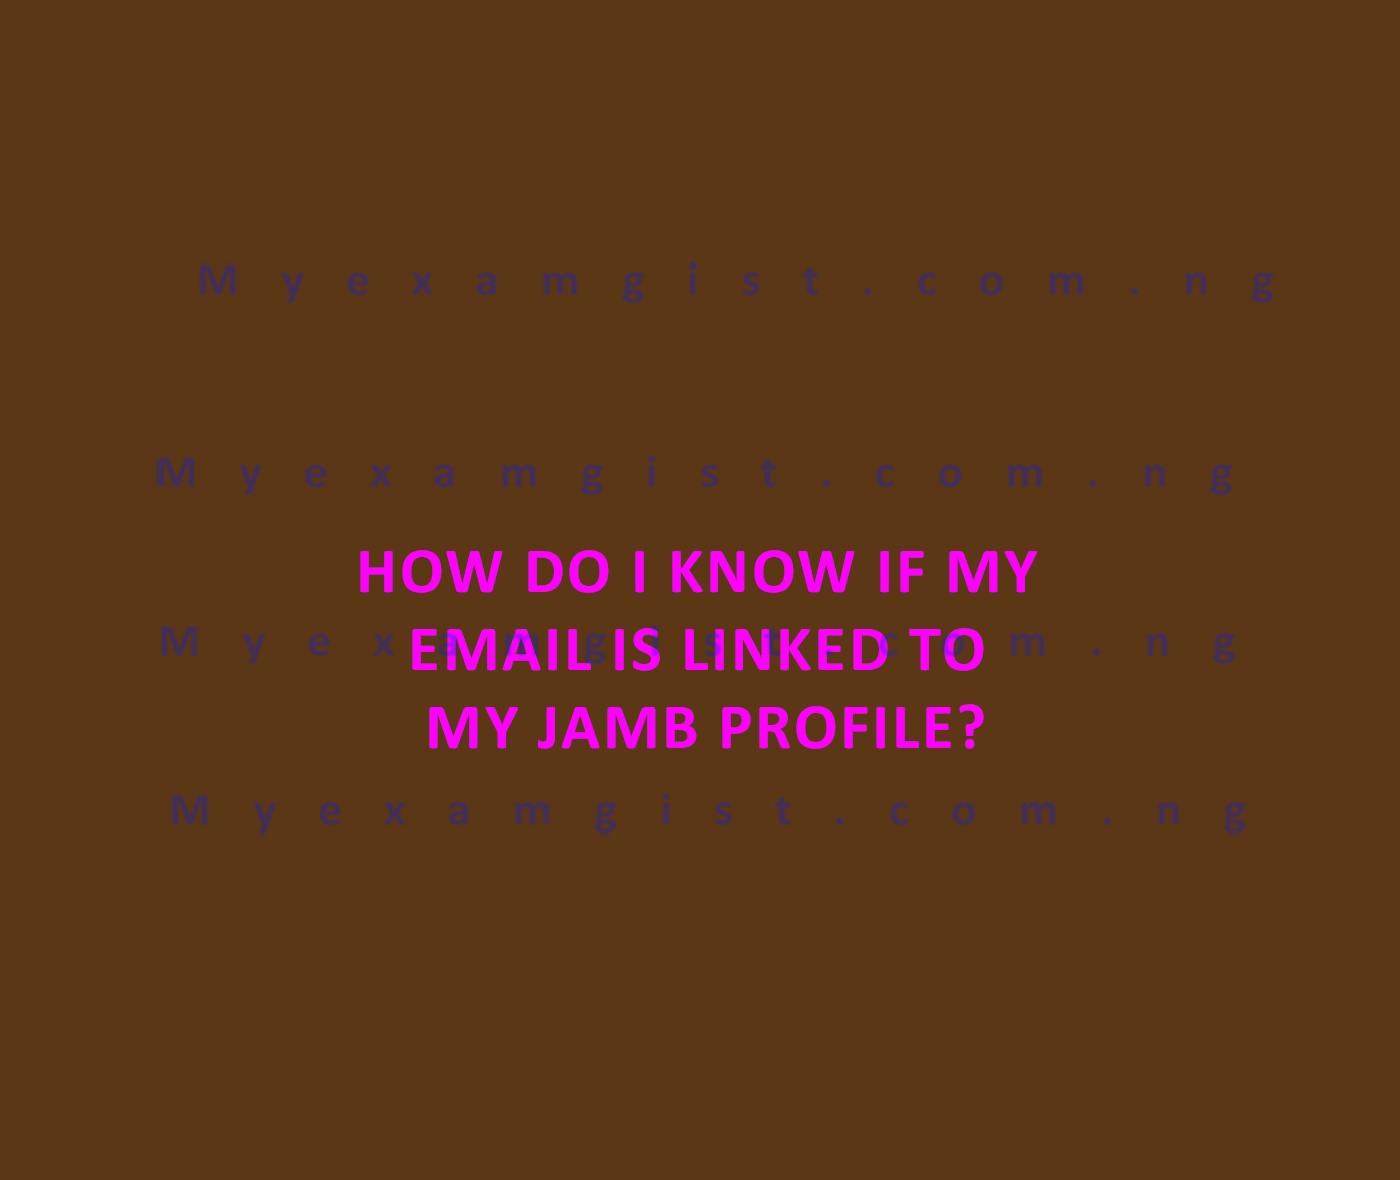 How do I know if my email is linked to my JAMB profile?